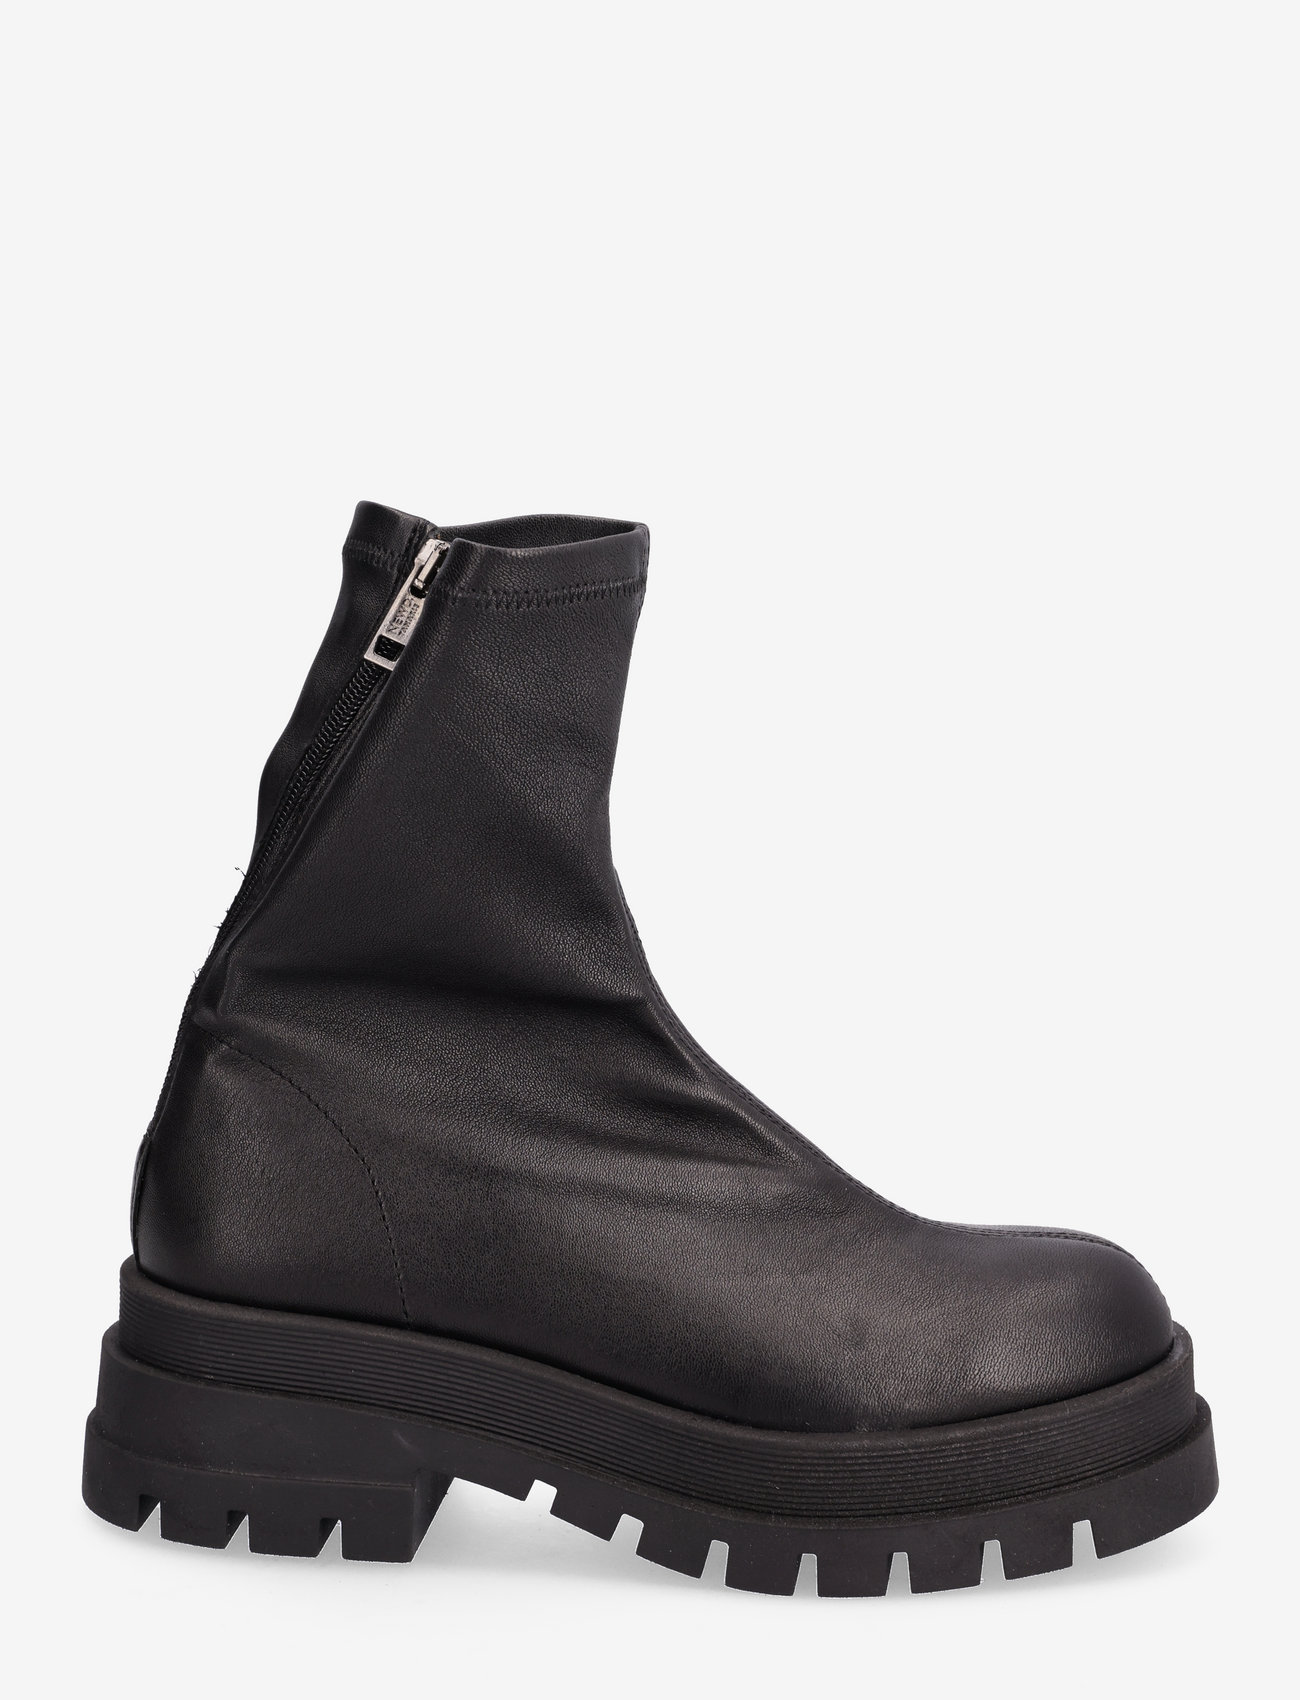 NEWD.Tamaris - Woms Boots - flat ankle boots - black - 1